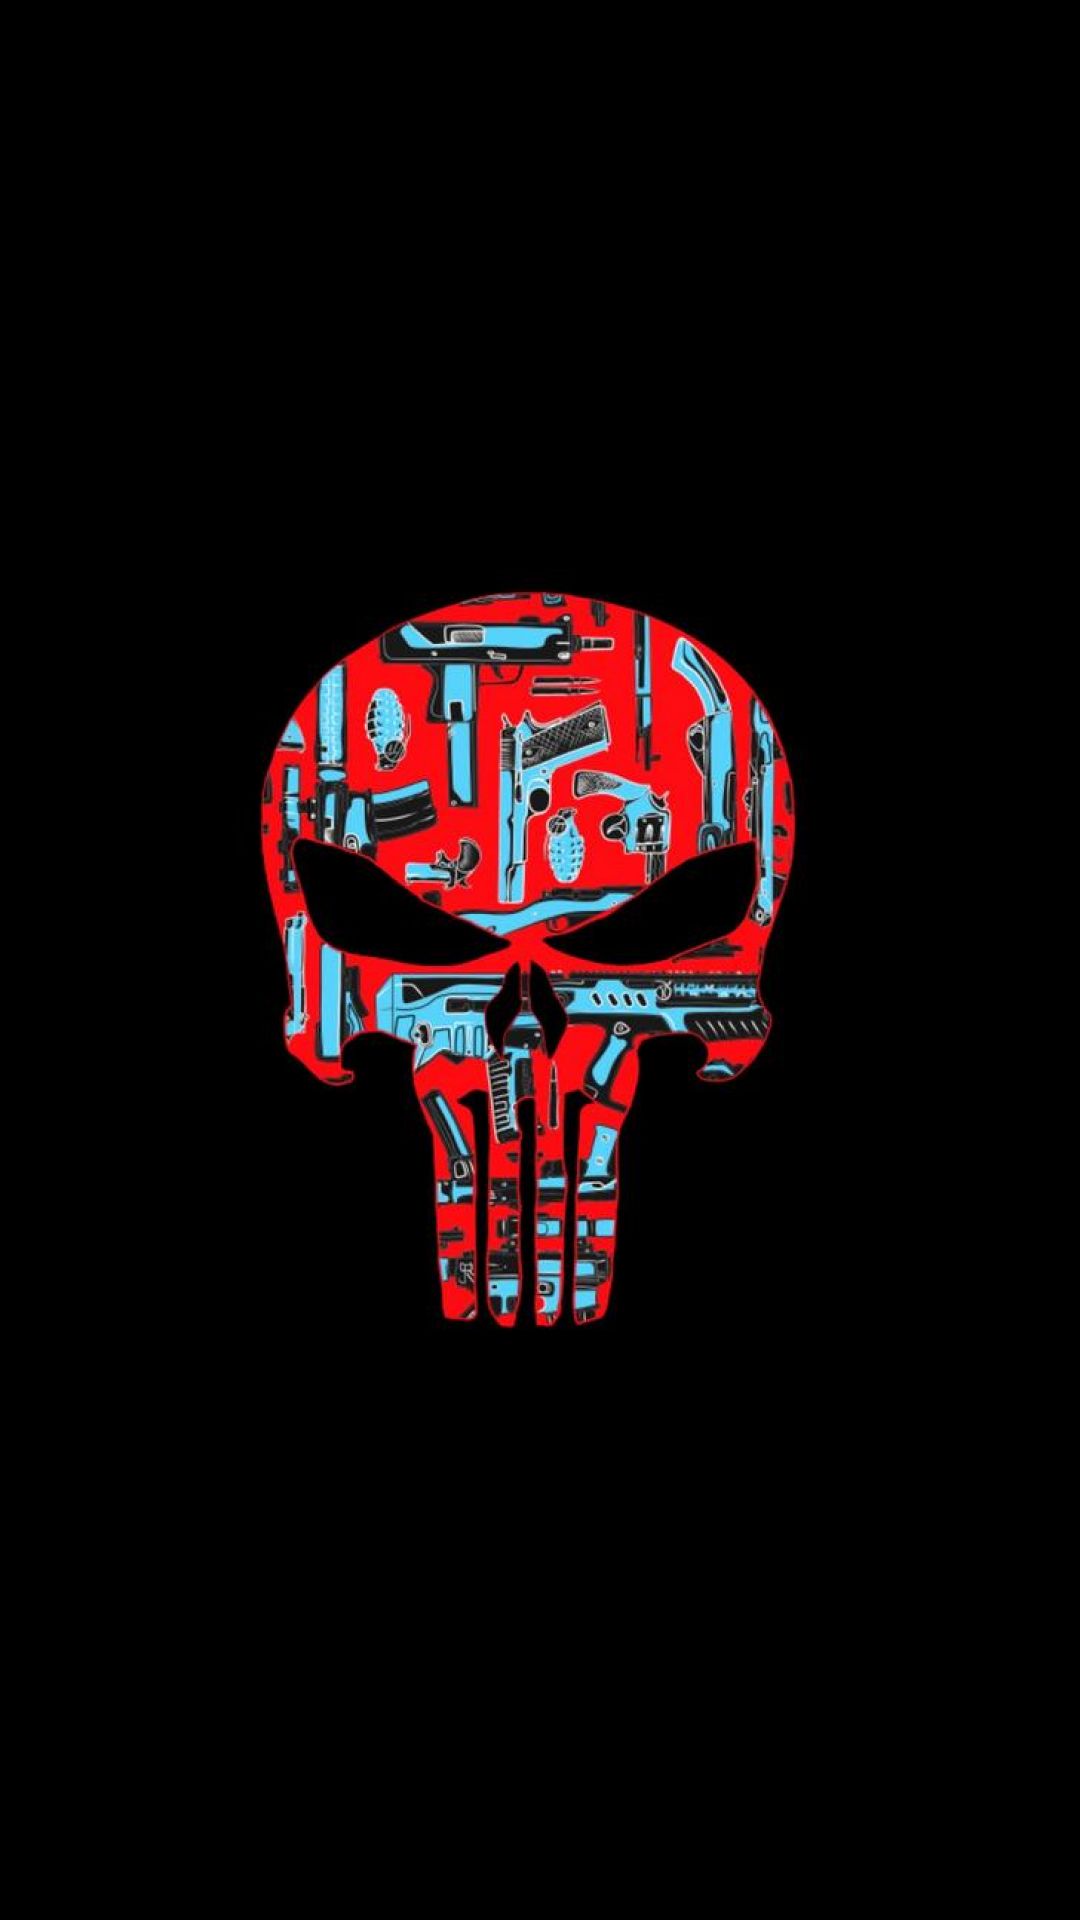 ✓[95+] AMOLED Punisher Skull Wallpaper (1080x1920) - Android / iPhone HD  Wallpaper Background Download (png / jpg) (2023)